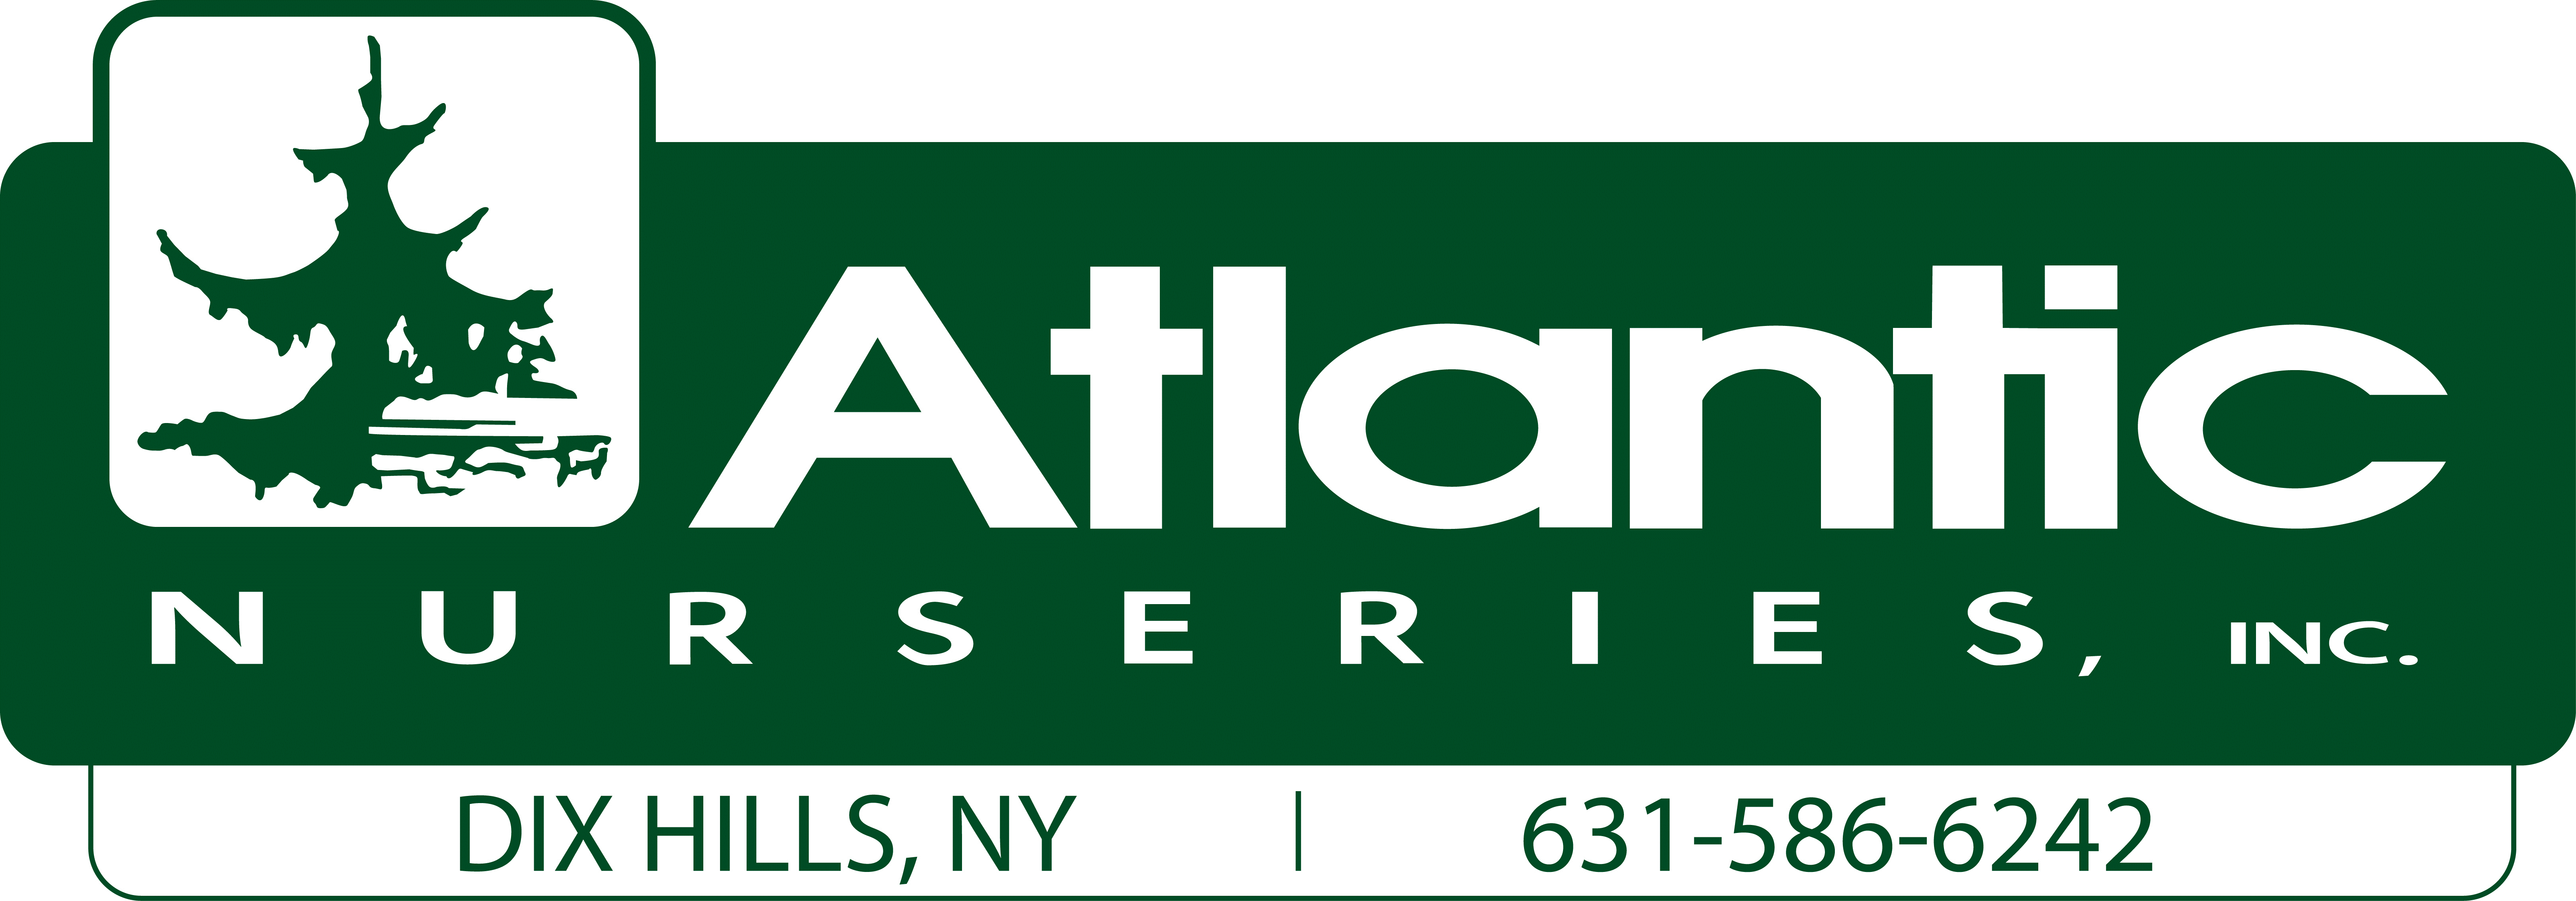 Atlantic Nursery is a Gold Sponsor of Evolution of the American Landscape Symposium